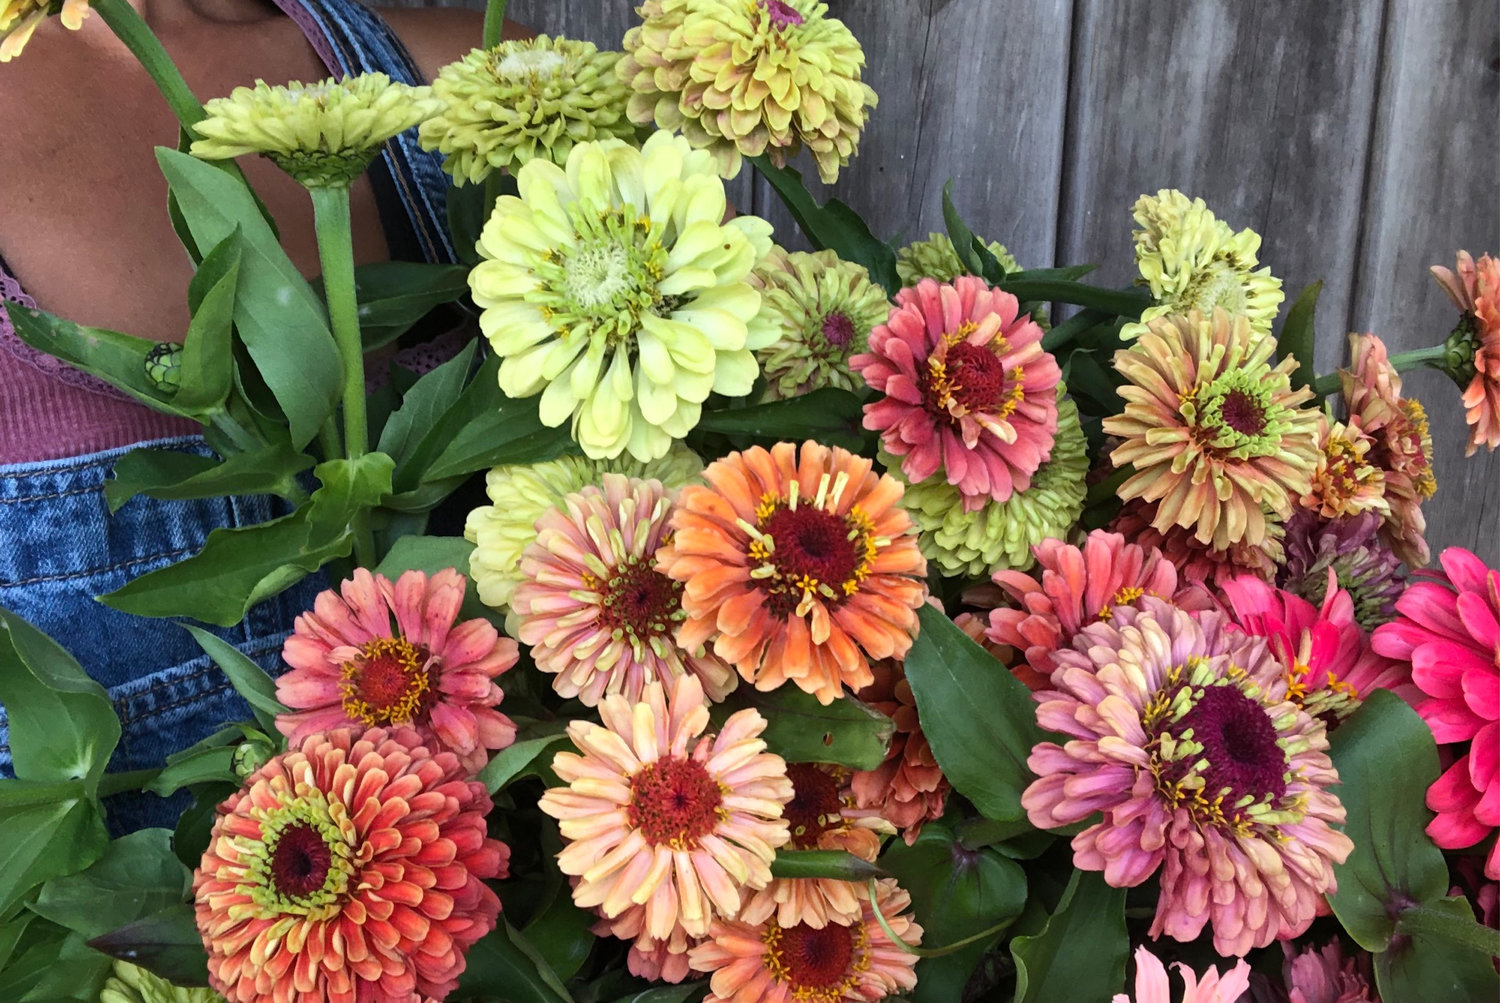 Colorful zinnias are summertime stunners